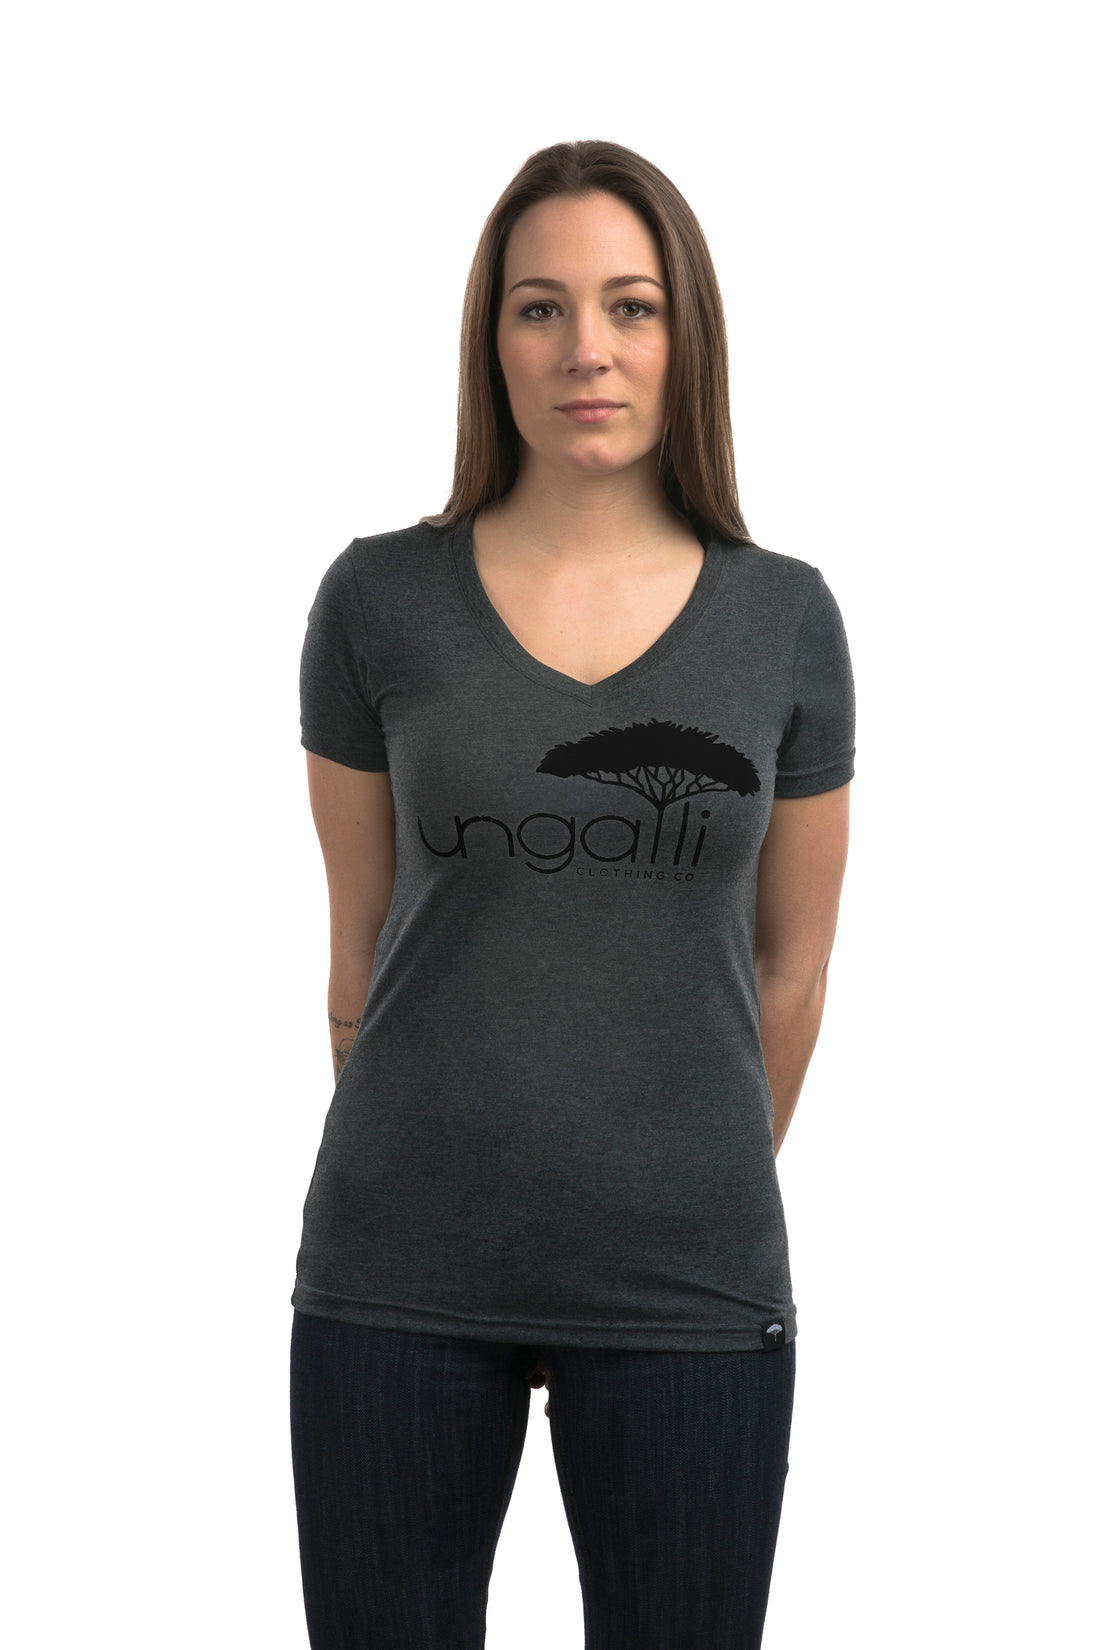 Women's recycled short sleeve grey t-shirt with black Ungalli logo on front